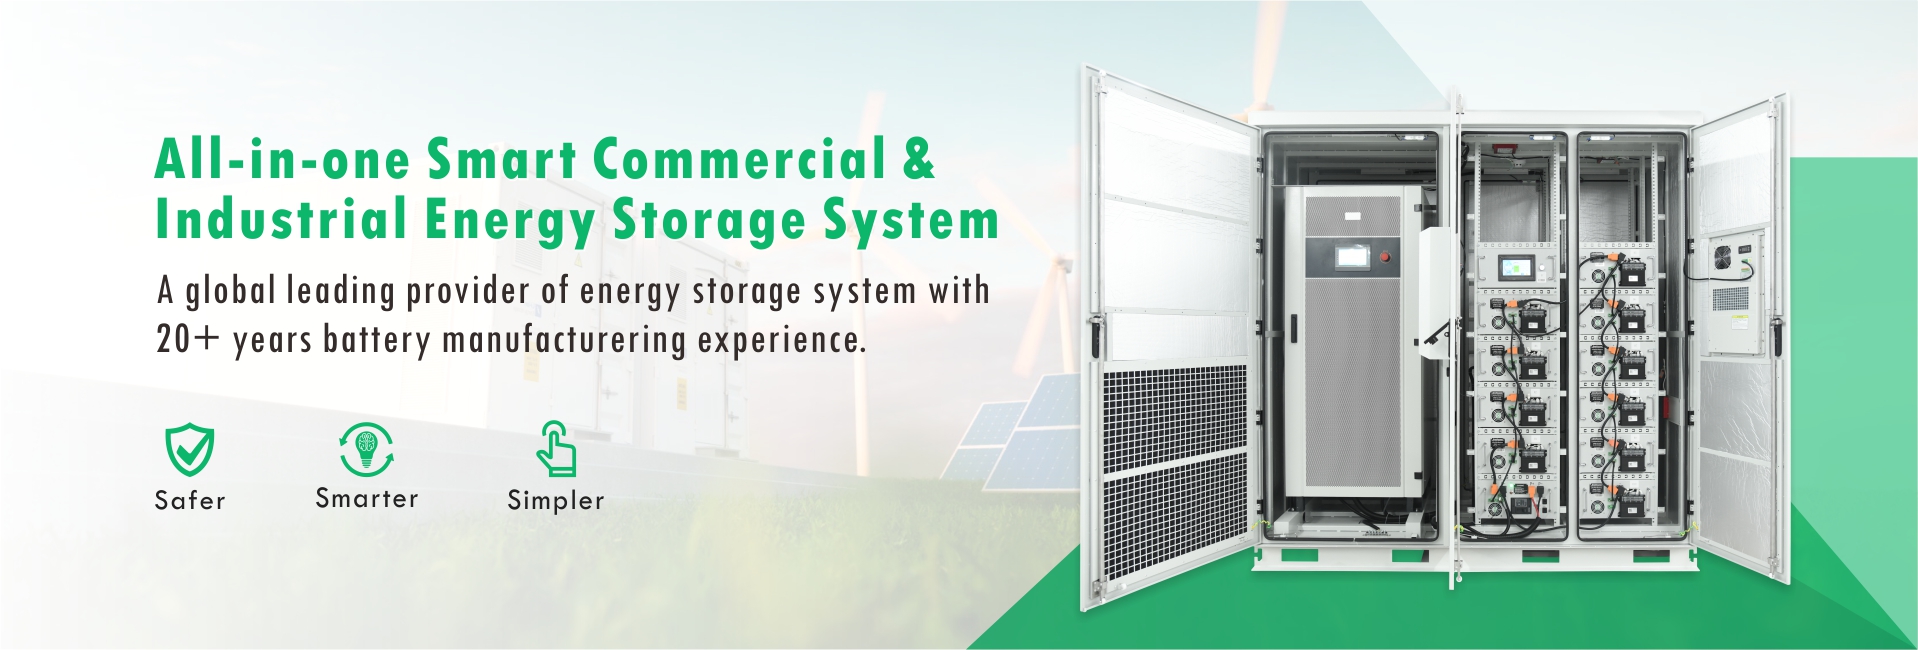 All-in-one Smart Commercial & Industrial Energy Storage System